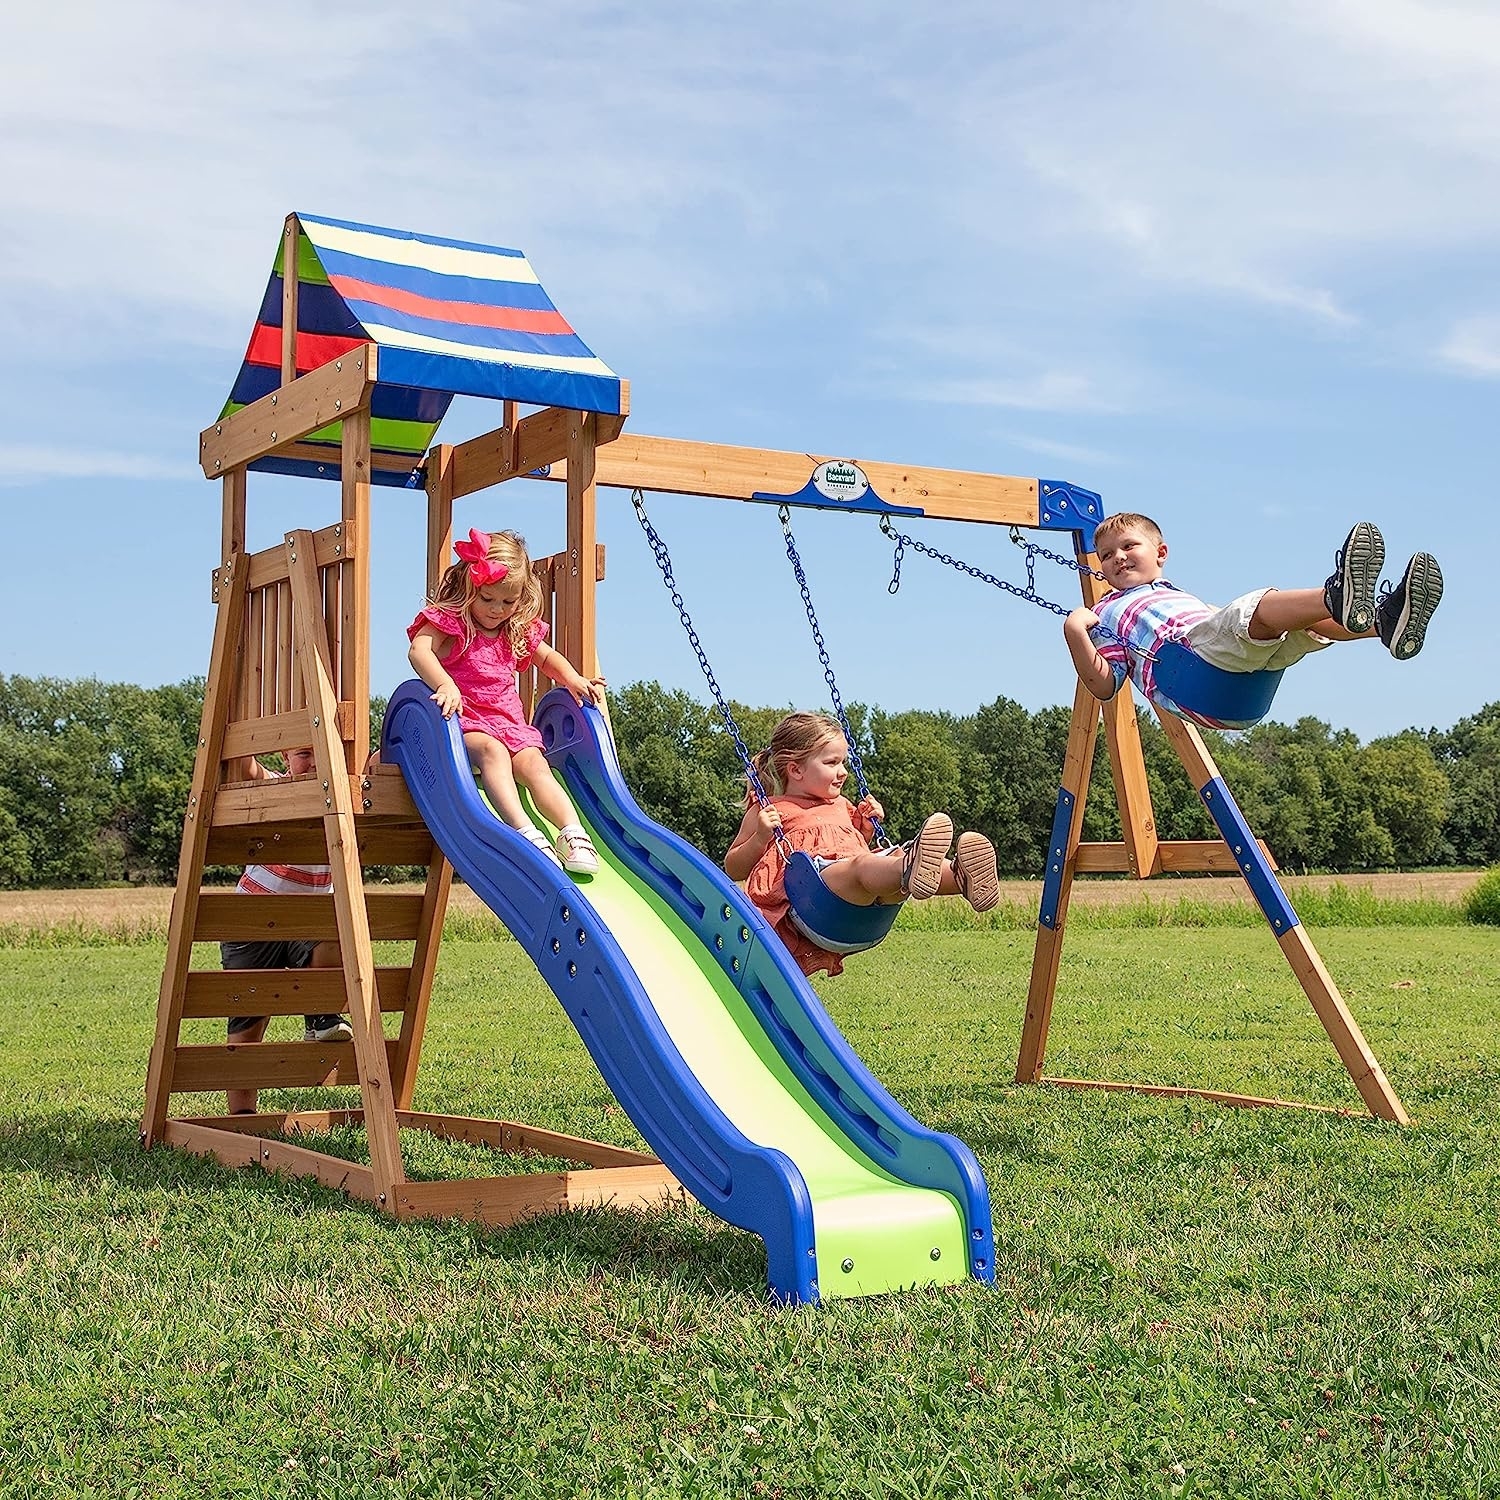 four children playing on a wooden swing set, which has a slide and two swings